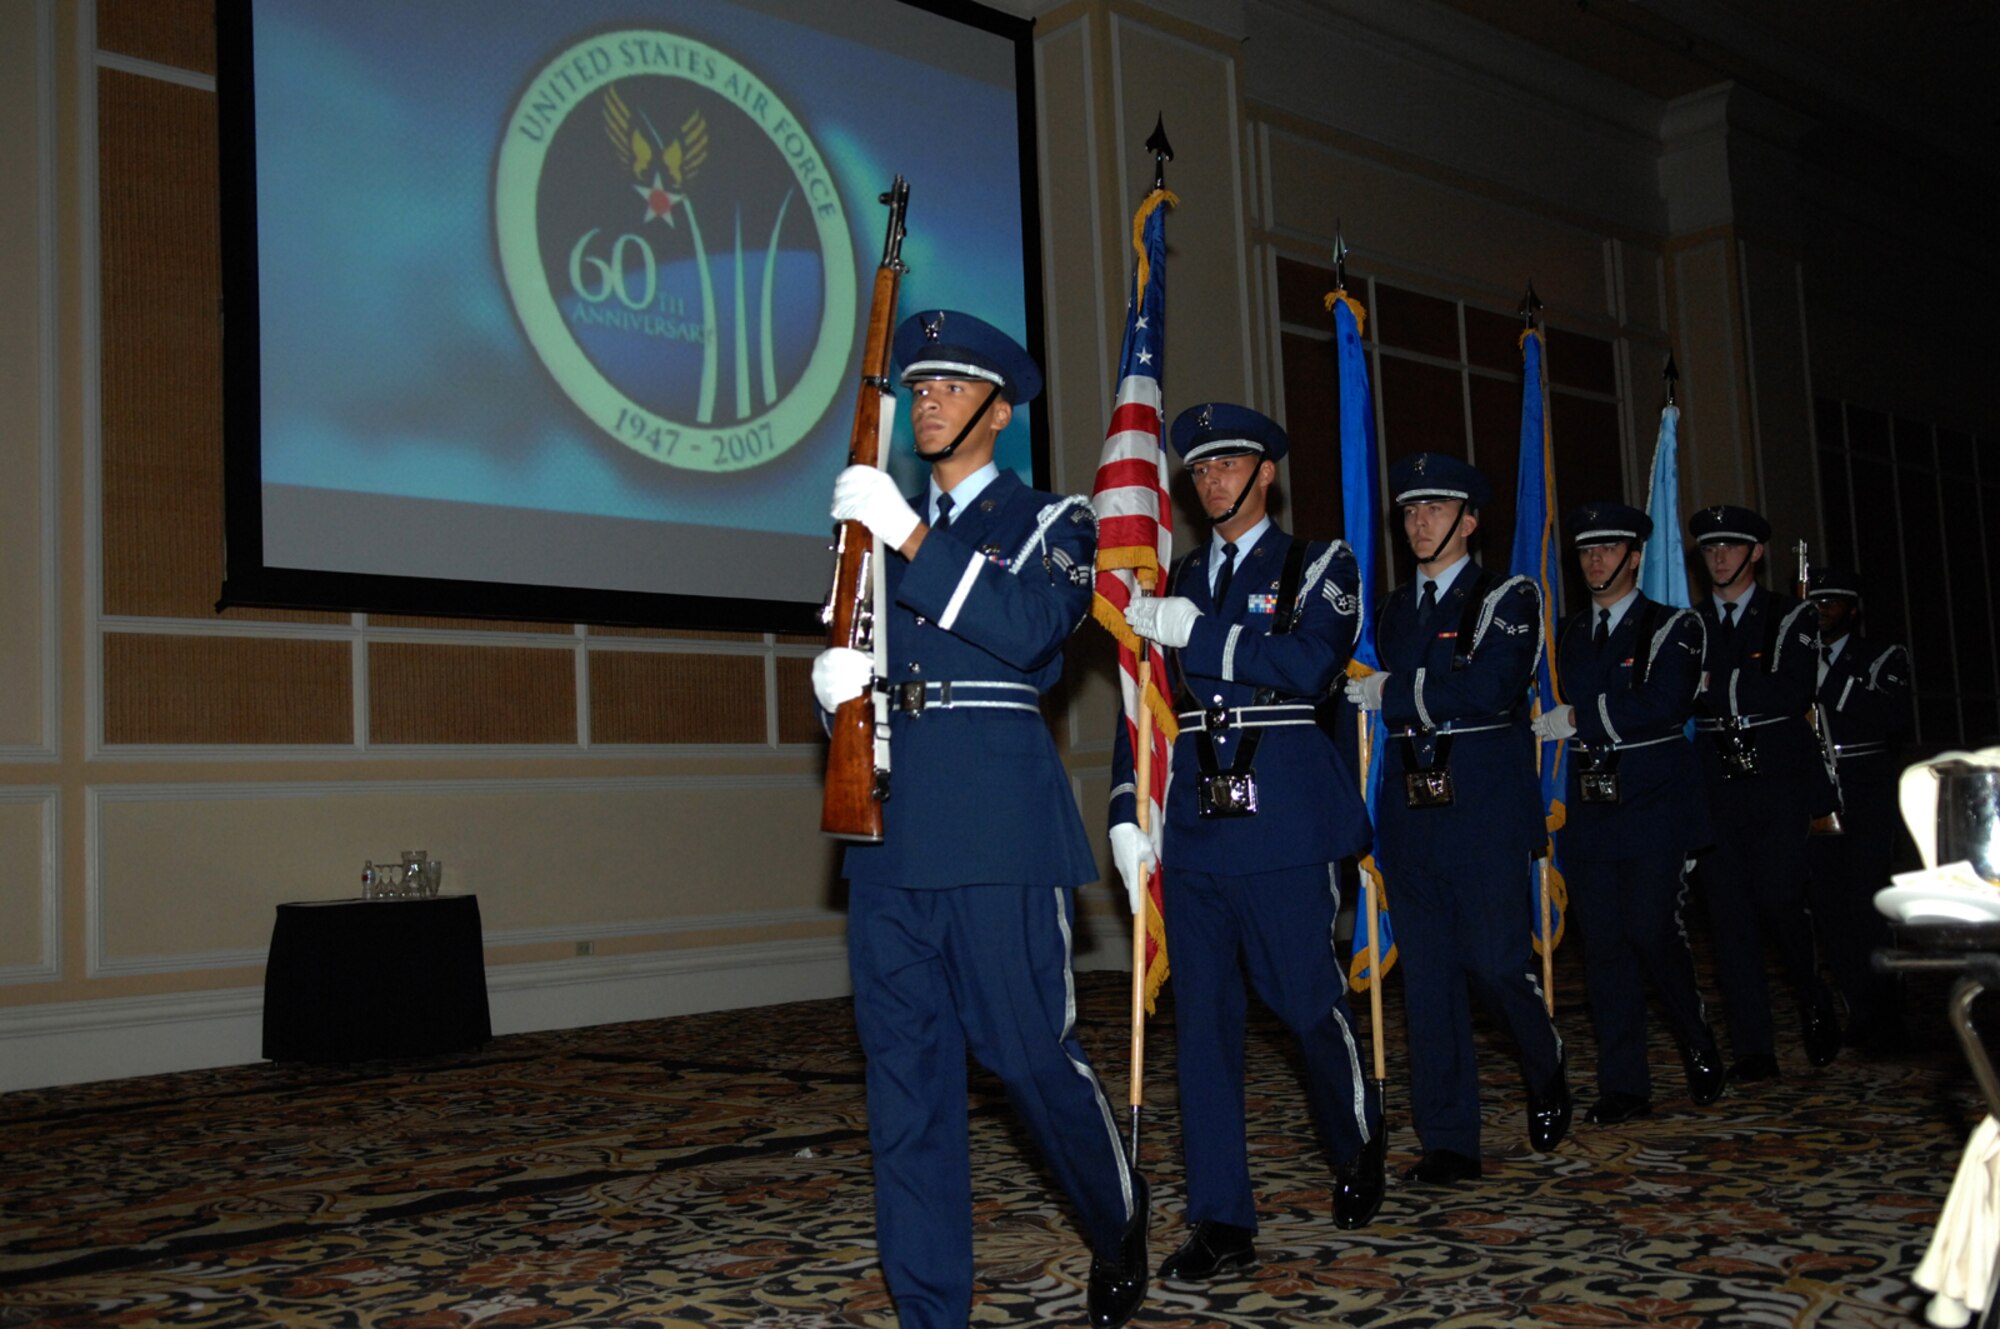 Members of the Nellis Air Force Base Honor Guard, prepare to post the colors during the 60th Anniversary Air Force Ball September 8, 2007 at the Mirage Hotel and Casino Las Vegas, NV.
(U.S. Air Force photo by Senior Airman Larry E. Reid Jr.)